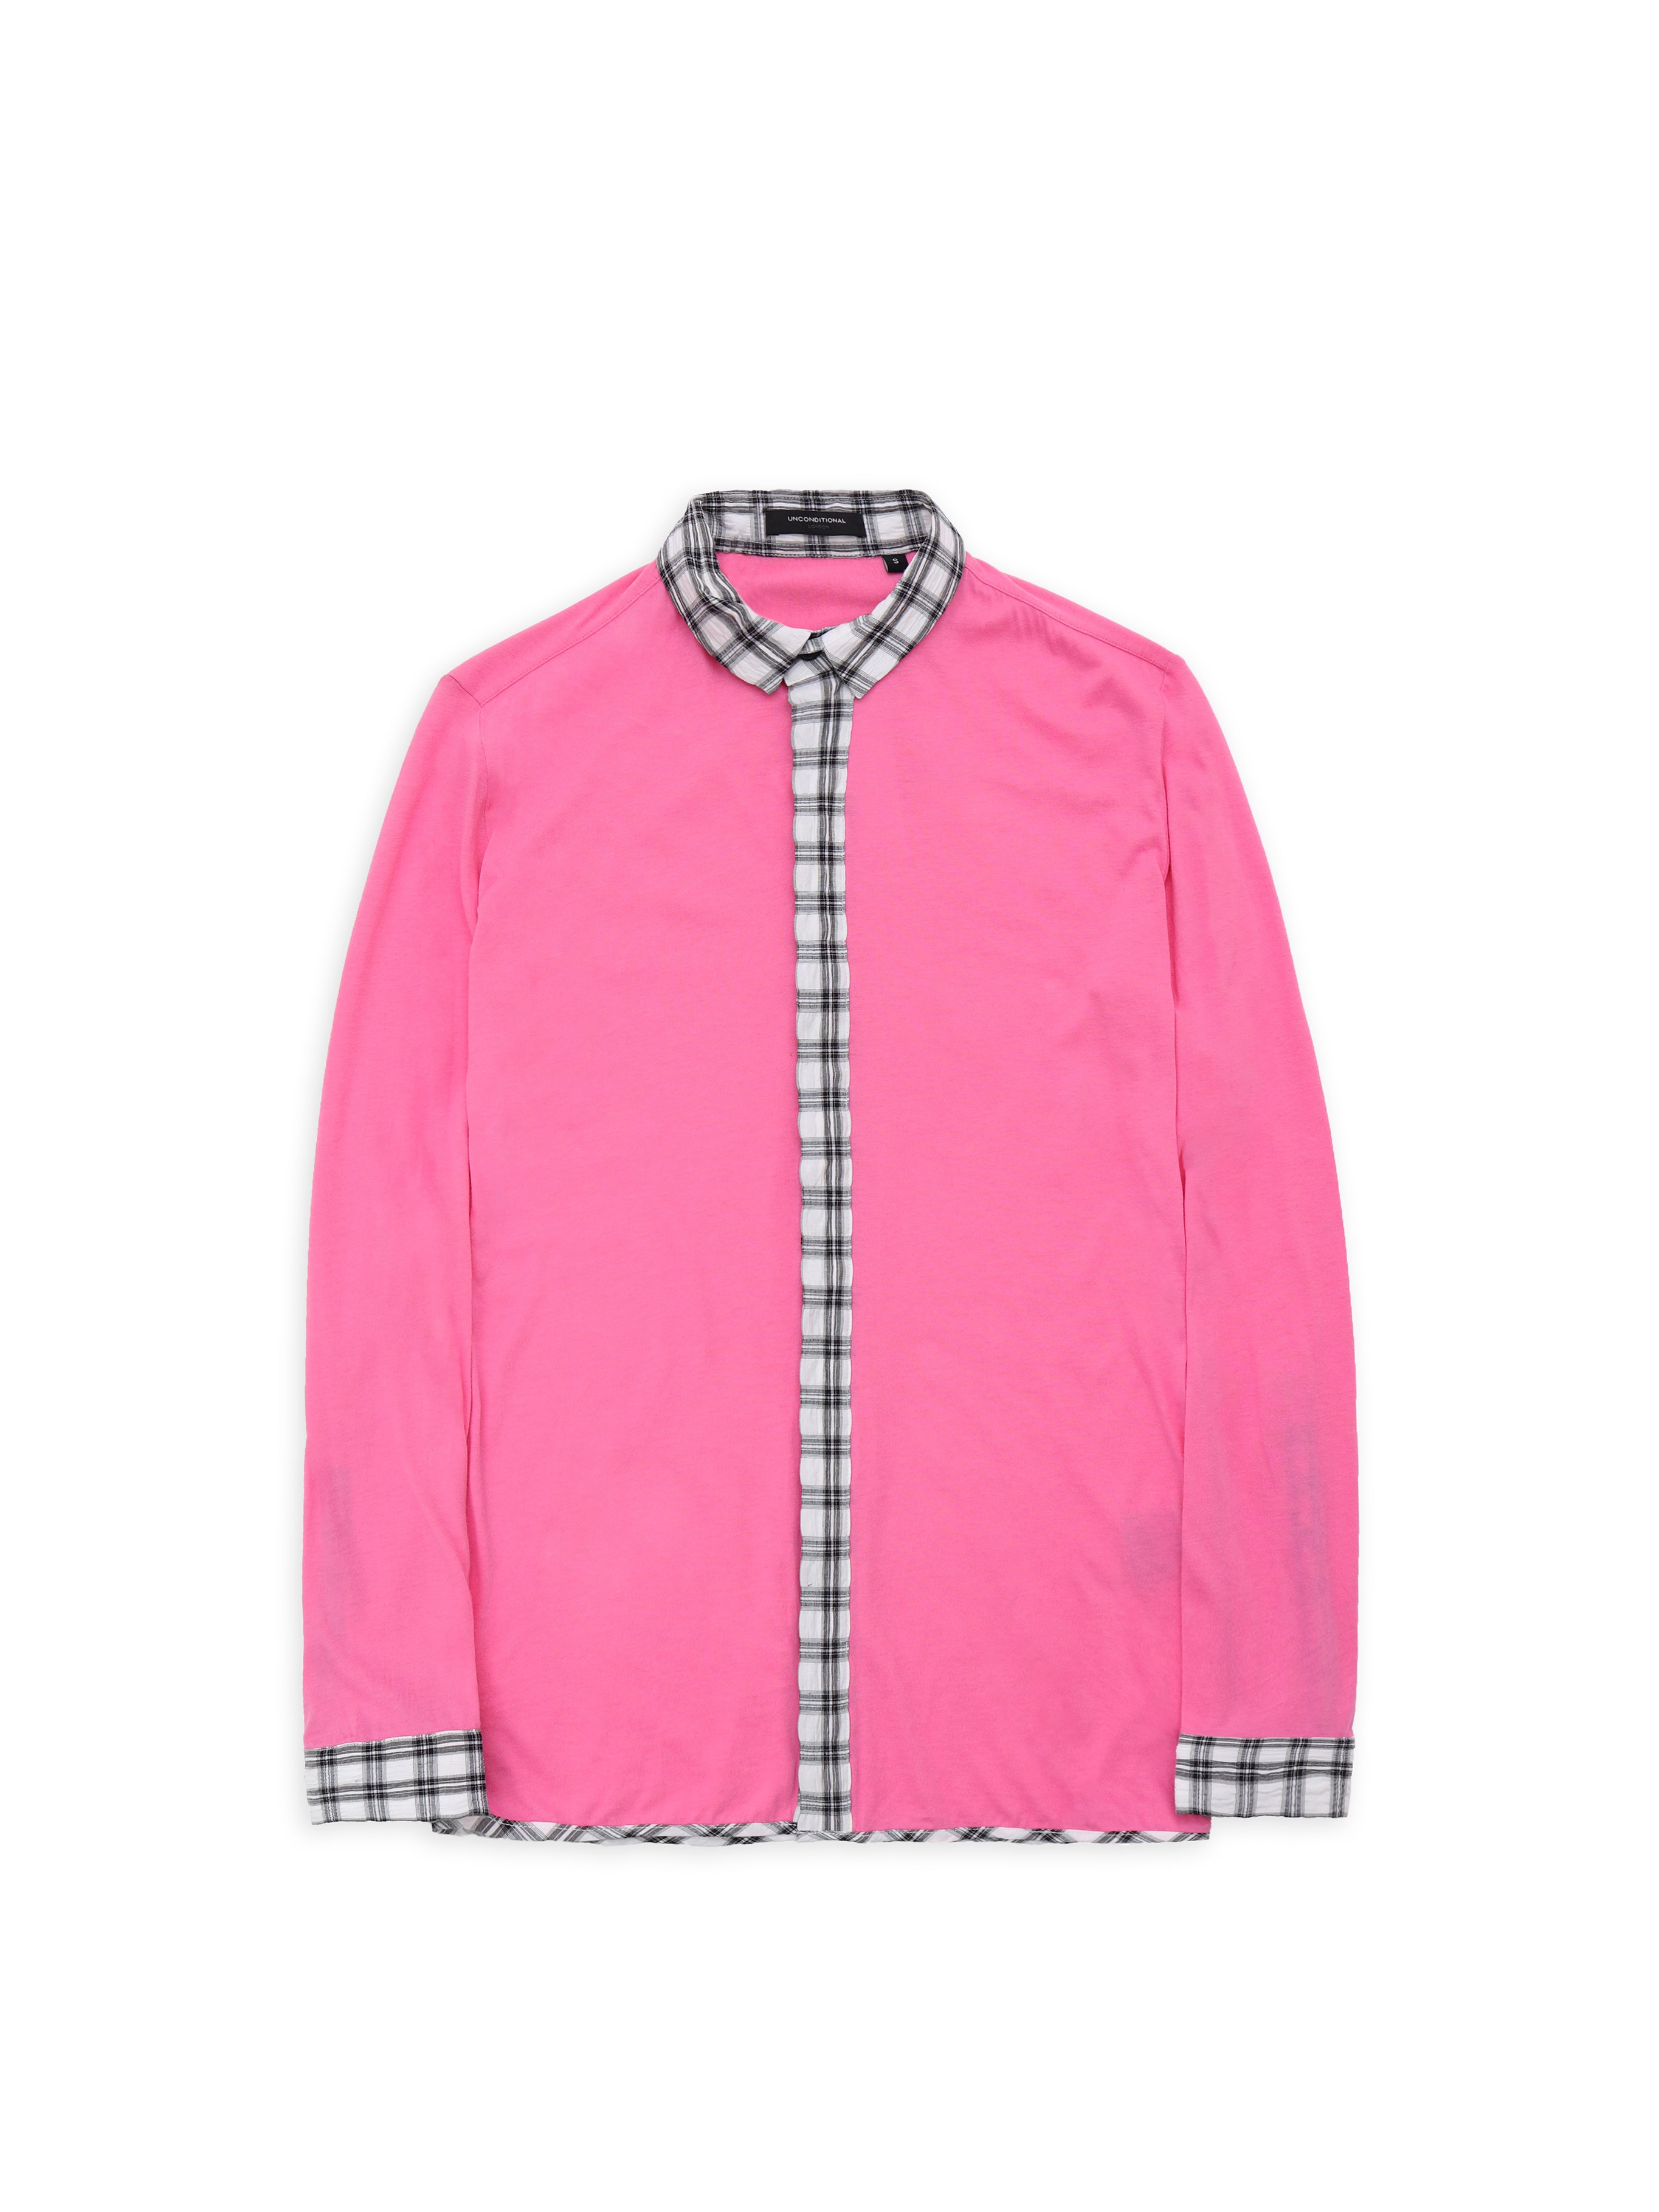 Pink and Checked Shirt